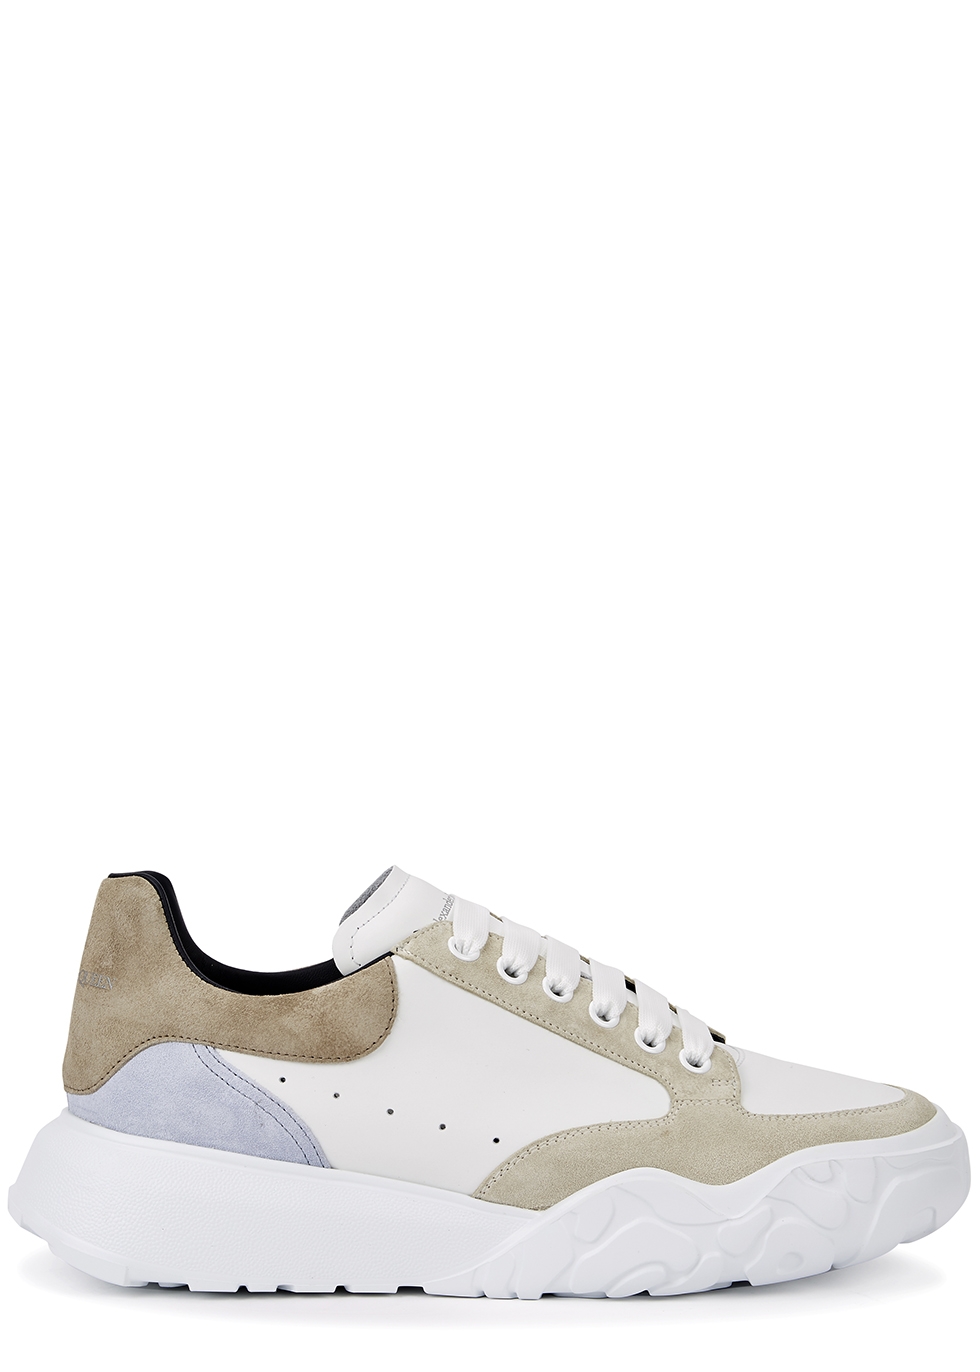 Court white panelled leather sneakers